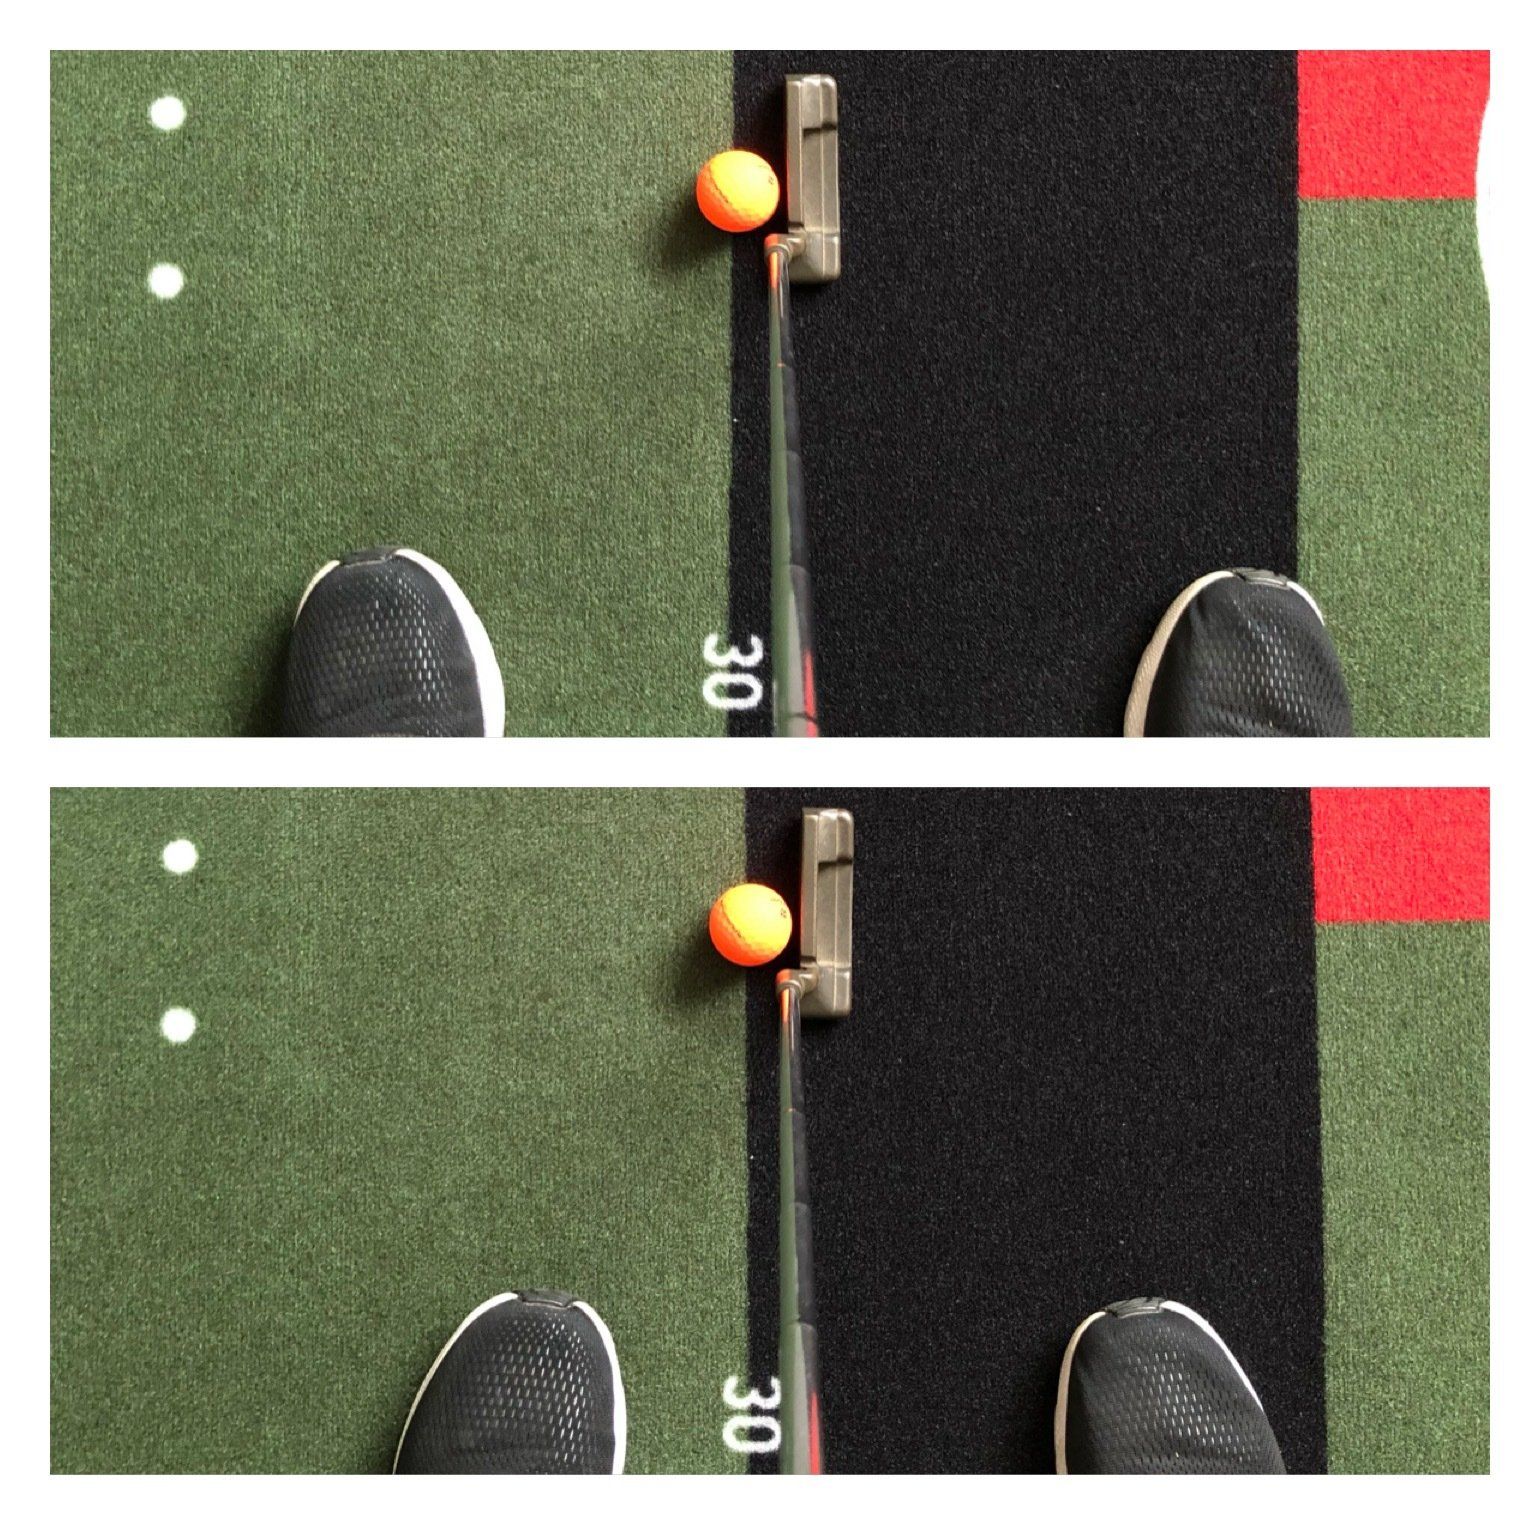 A change of stance can really help your putting